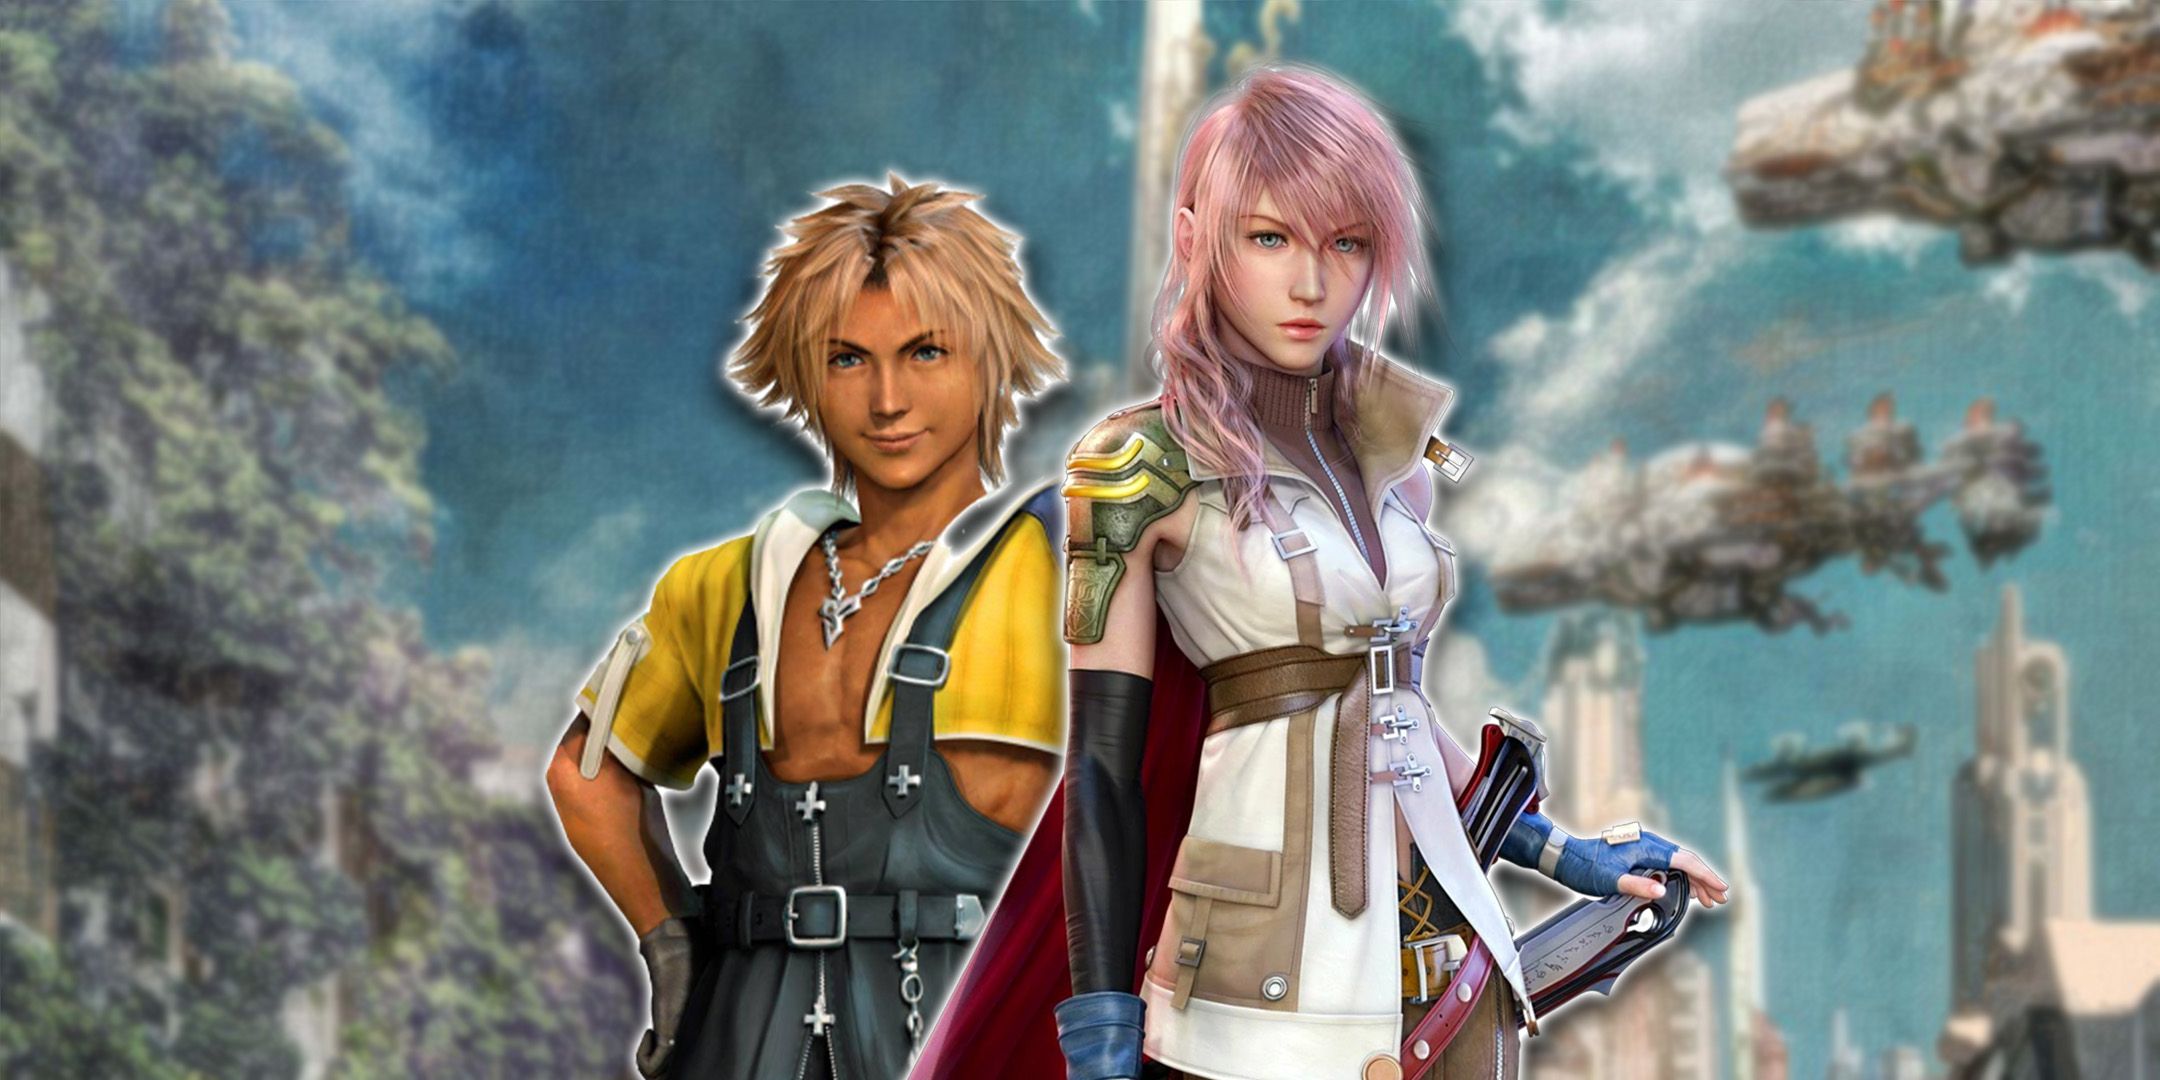 Tidus and Lightning from Final Fantasy standing side by side against a backdrop of buildings and air ships